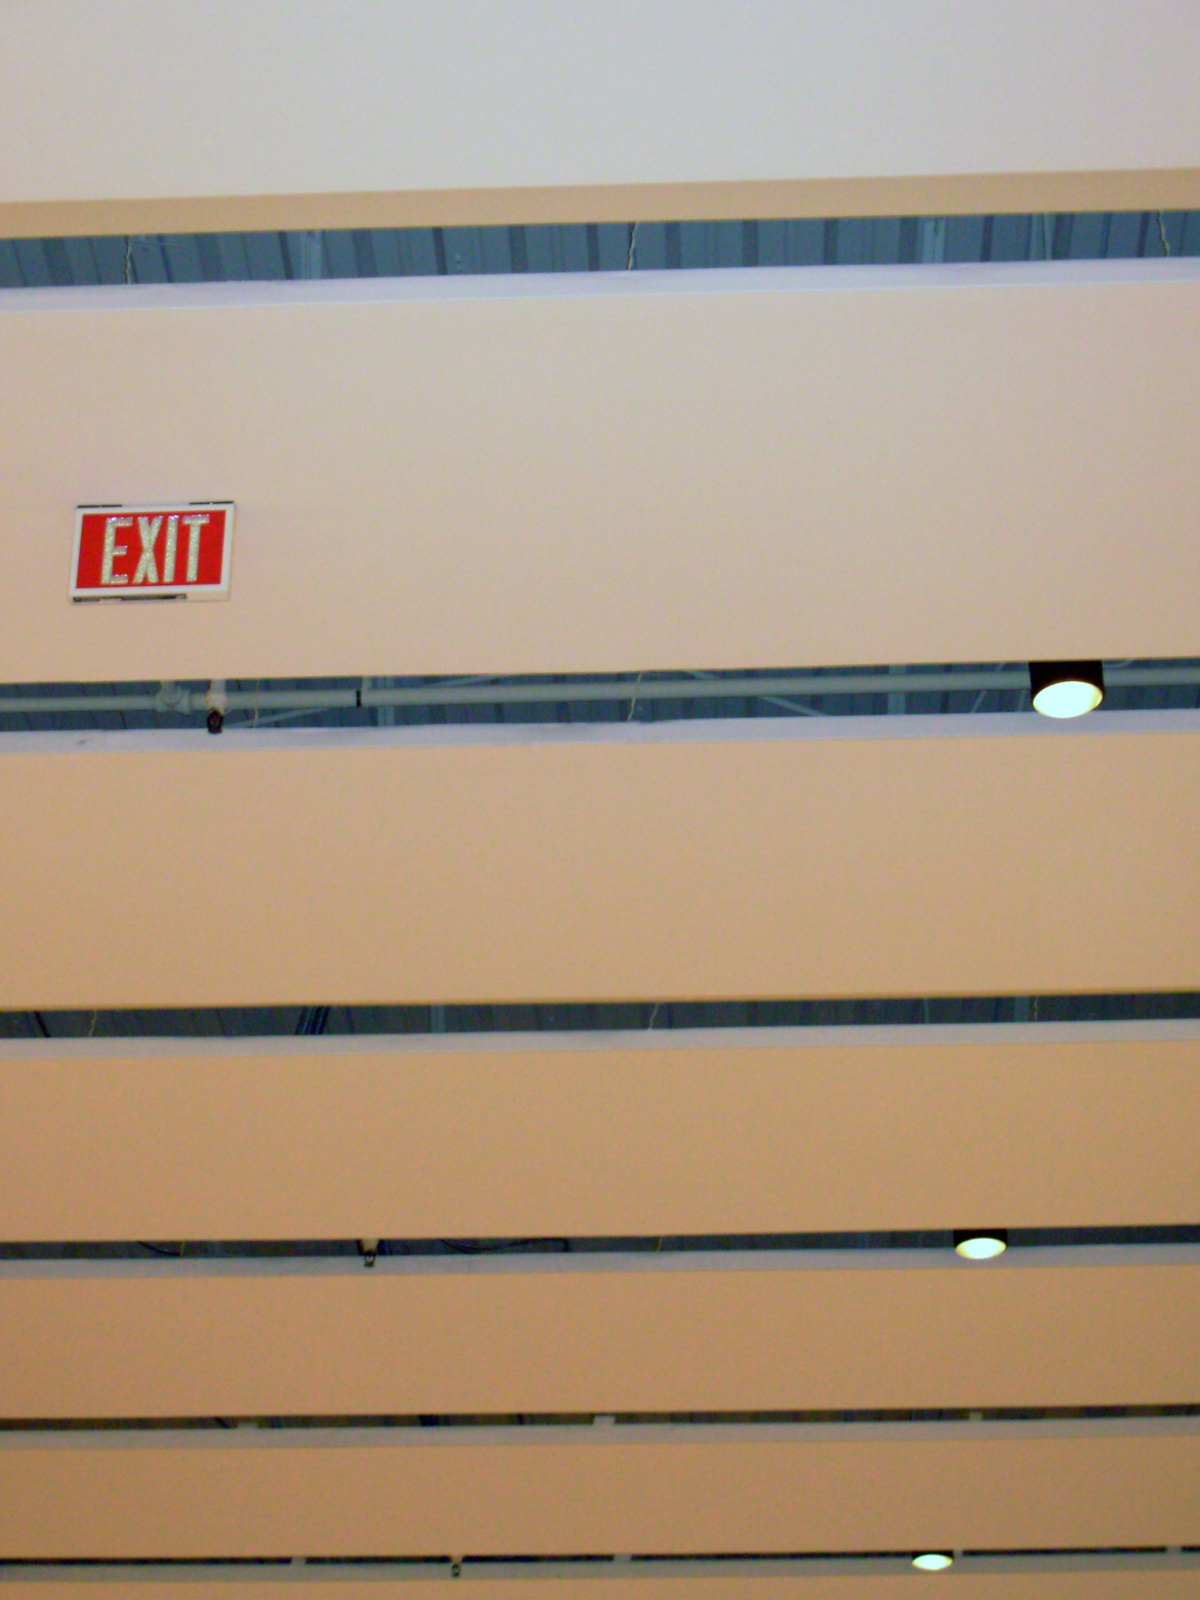 Exit sign photo